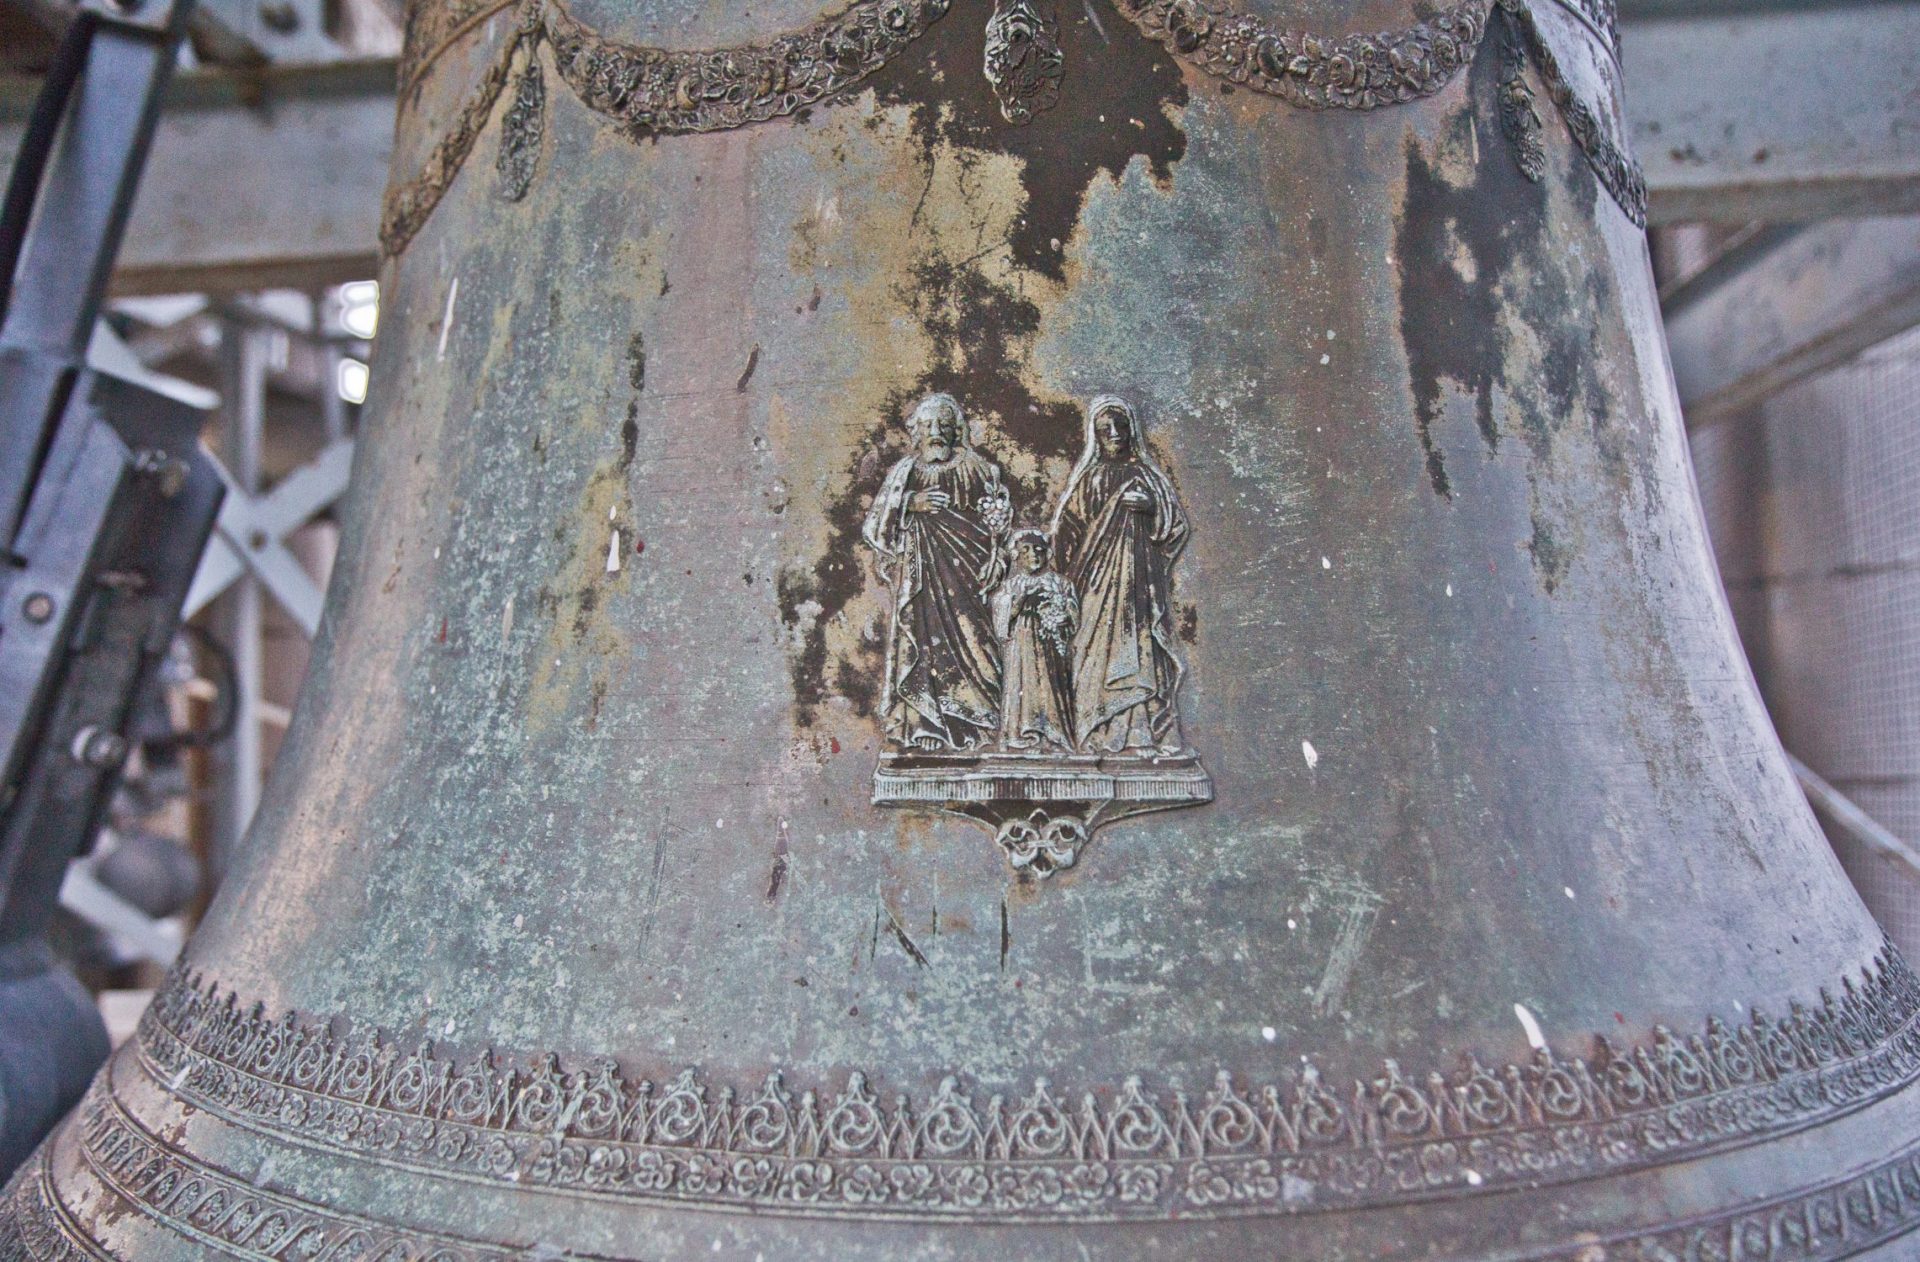 One of the Germantown carillon bells. The carillon was installed in 1900.